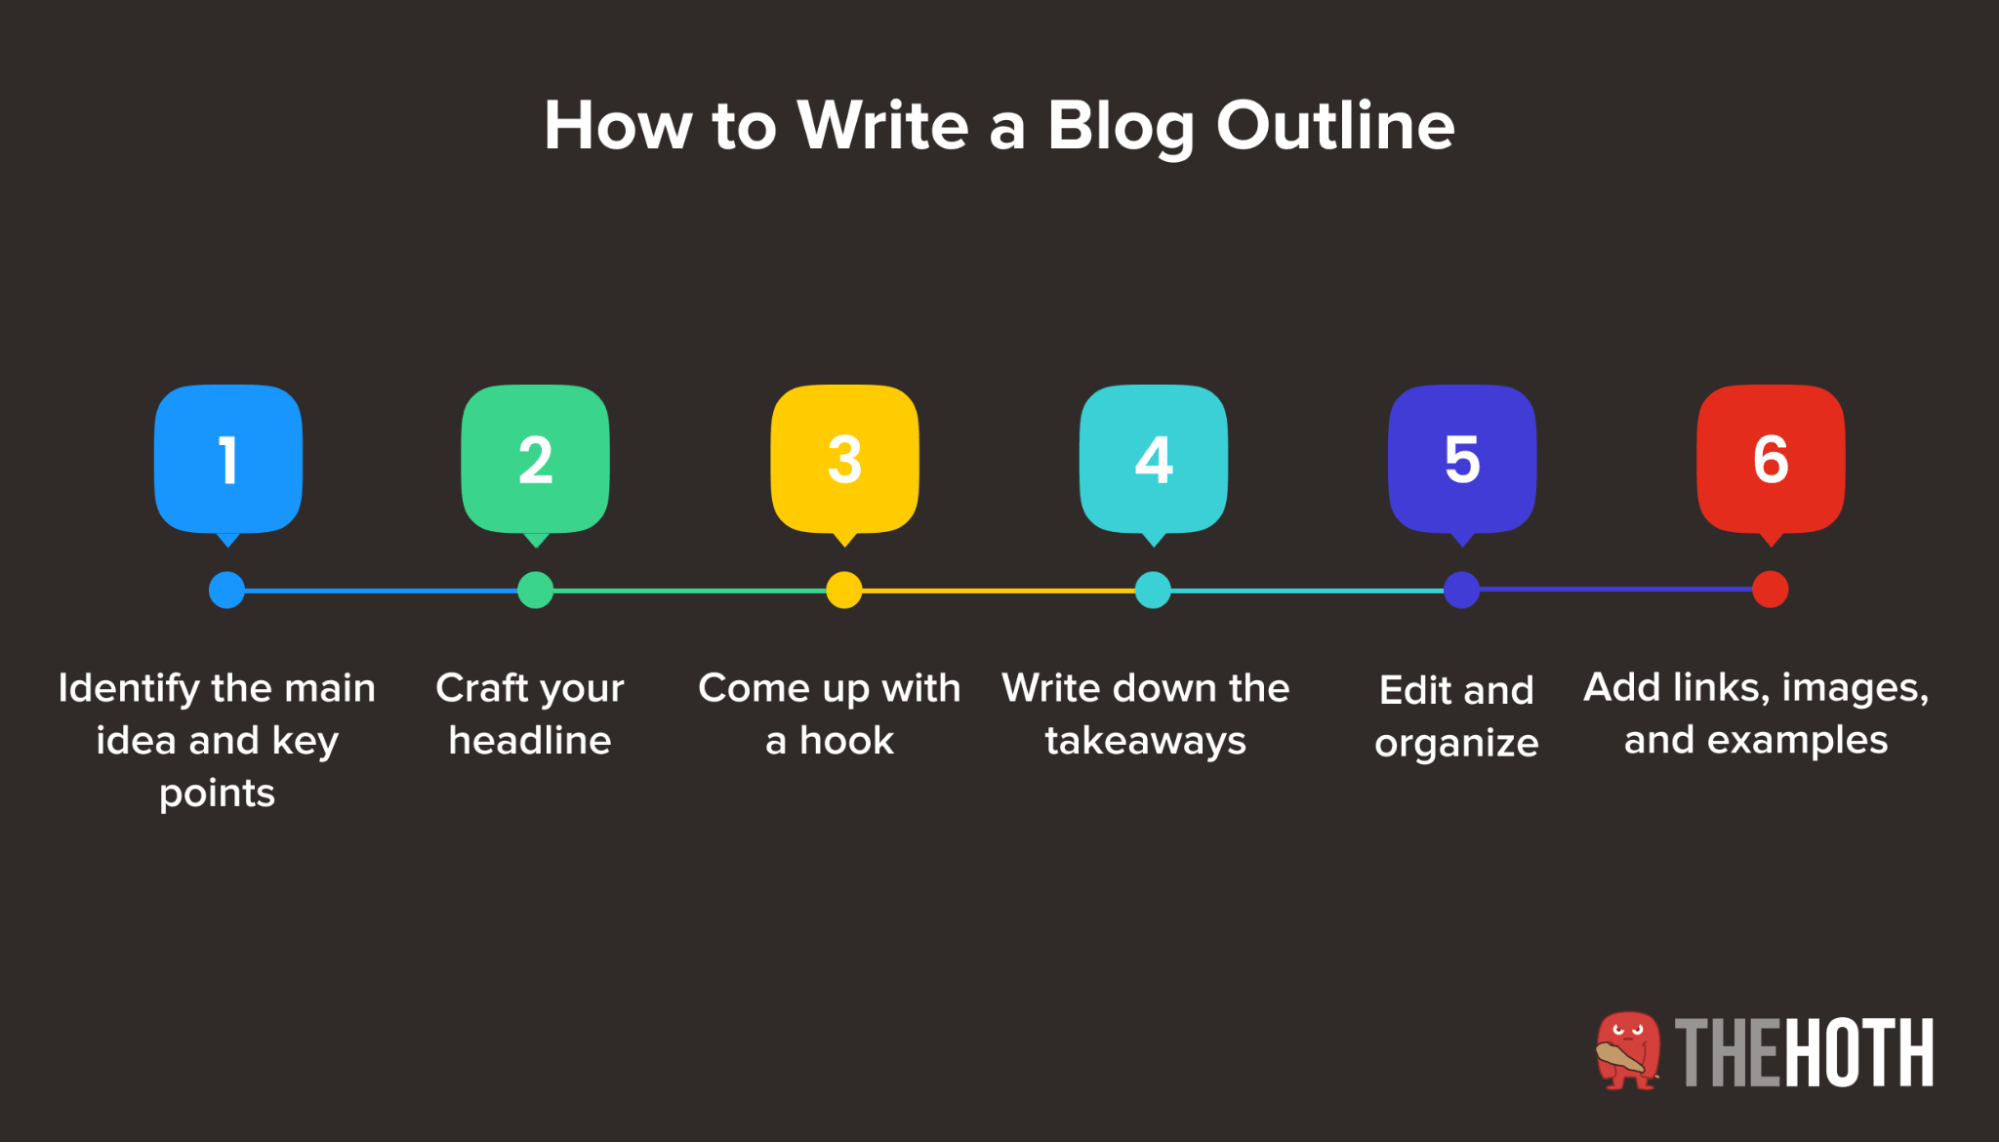 How to create an effective blog outline